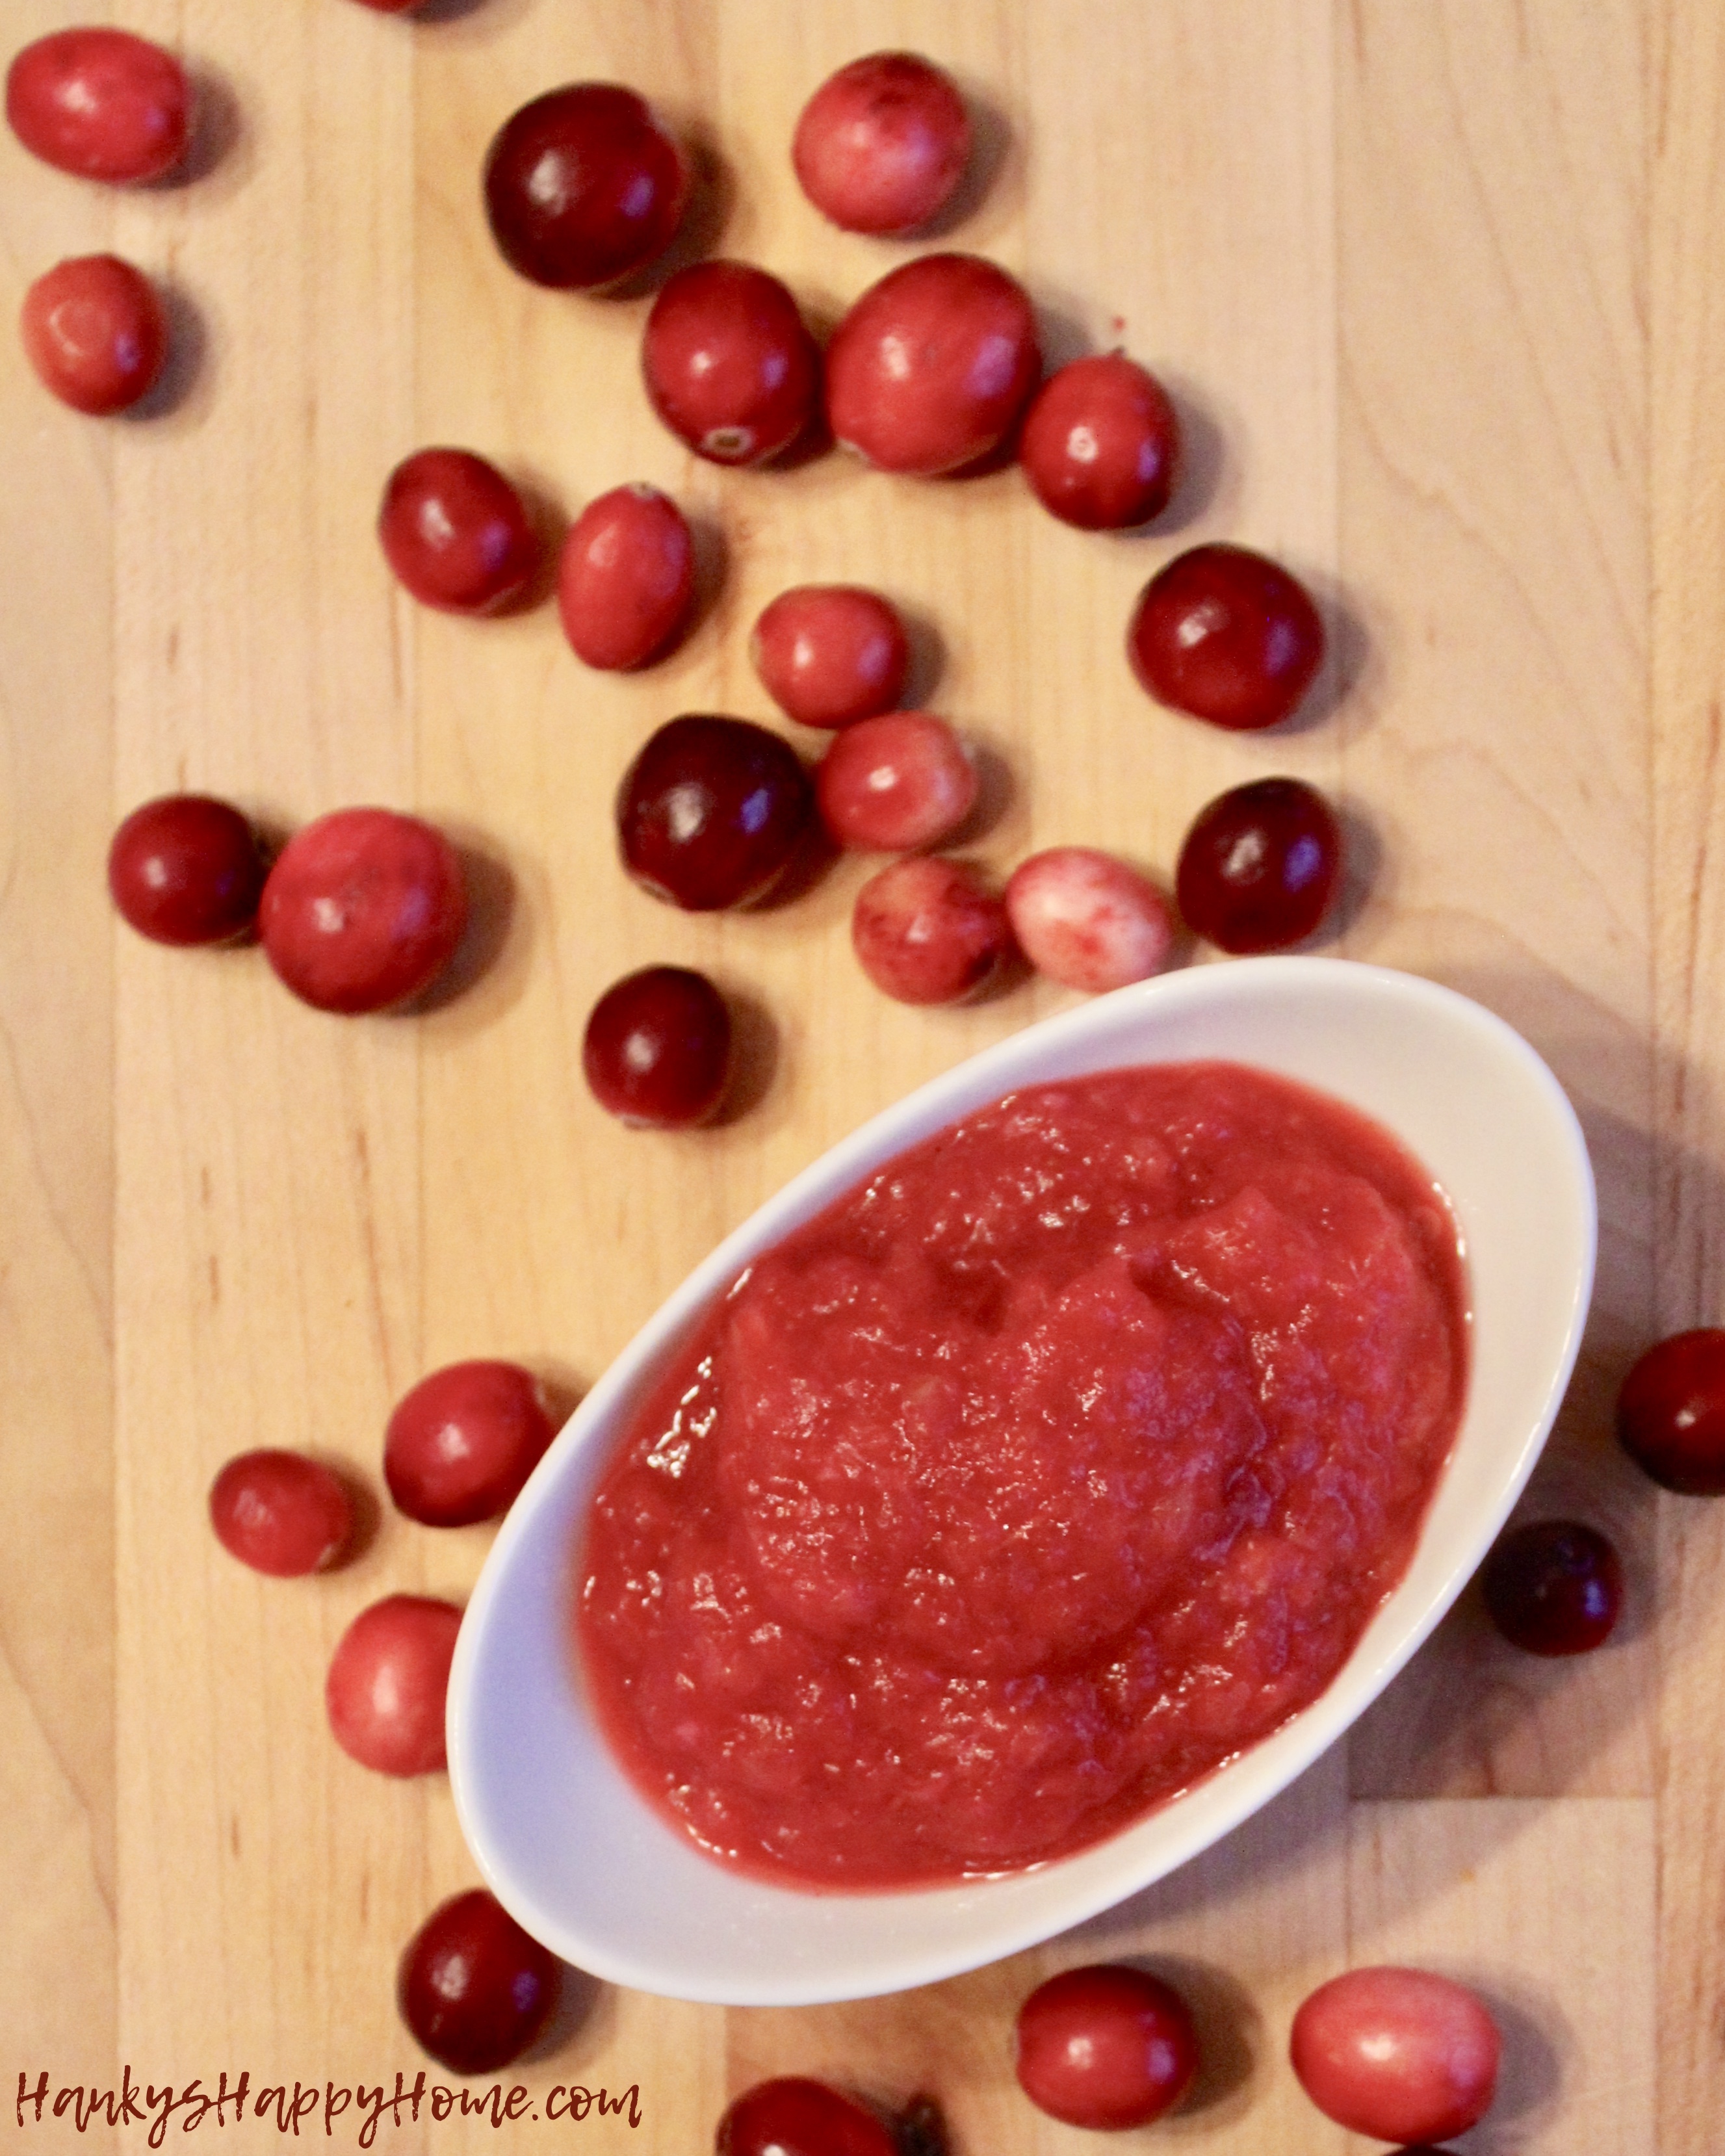 Get into the holiday season with this Cranberry, Apple & Orange Puree!